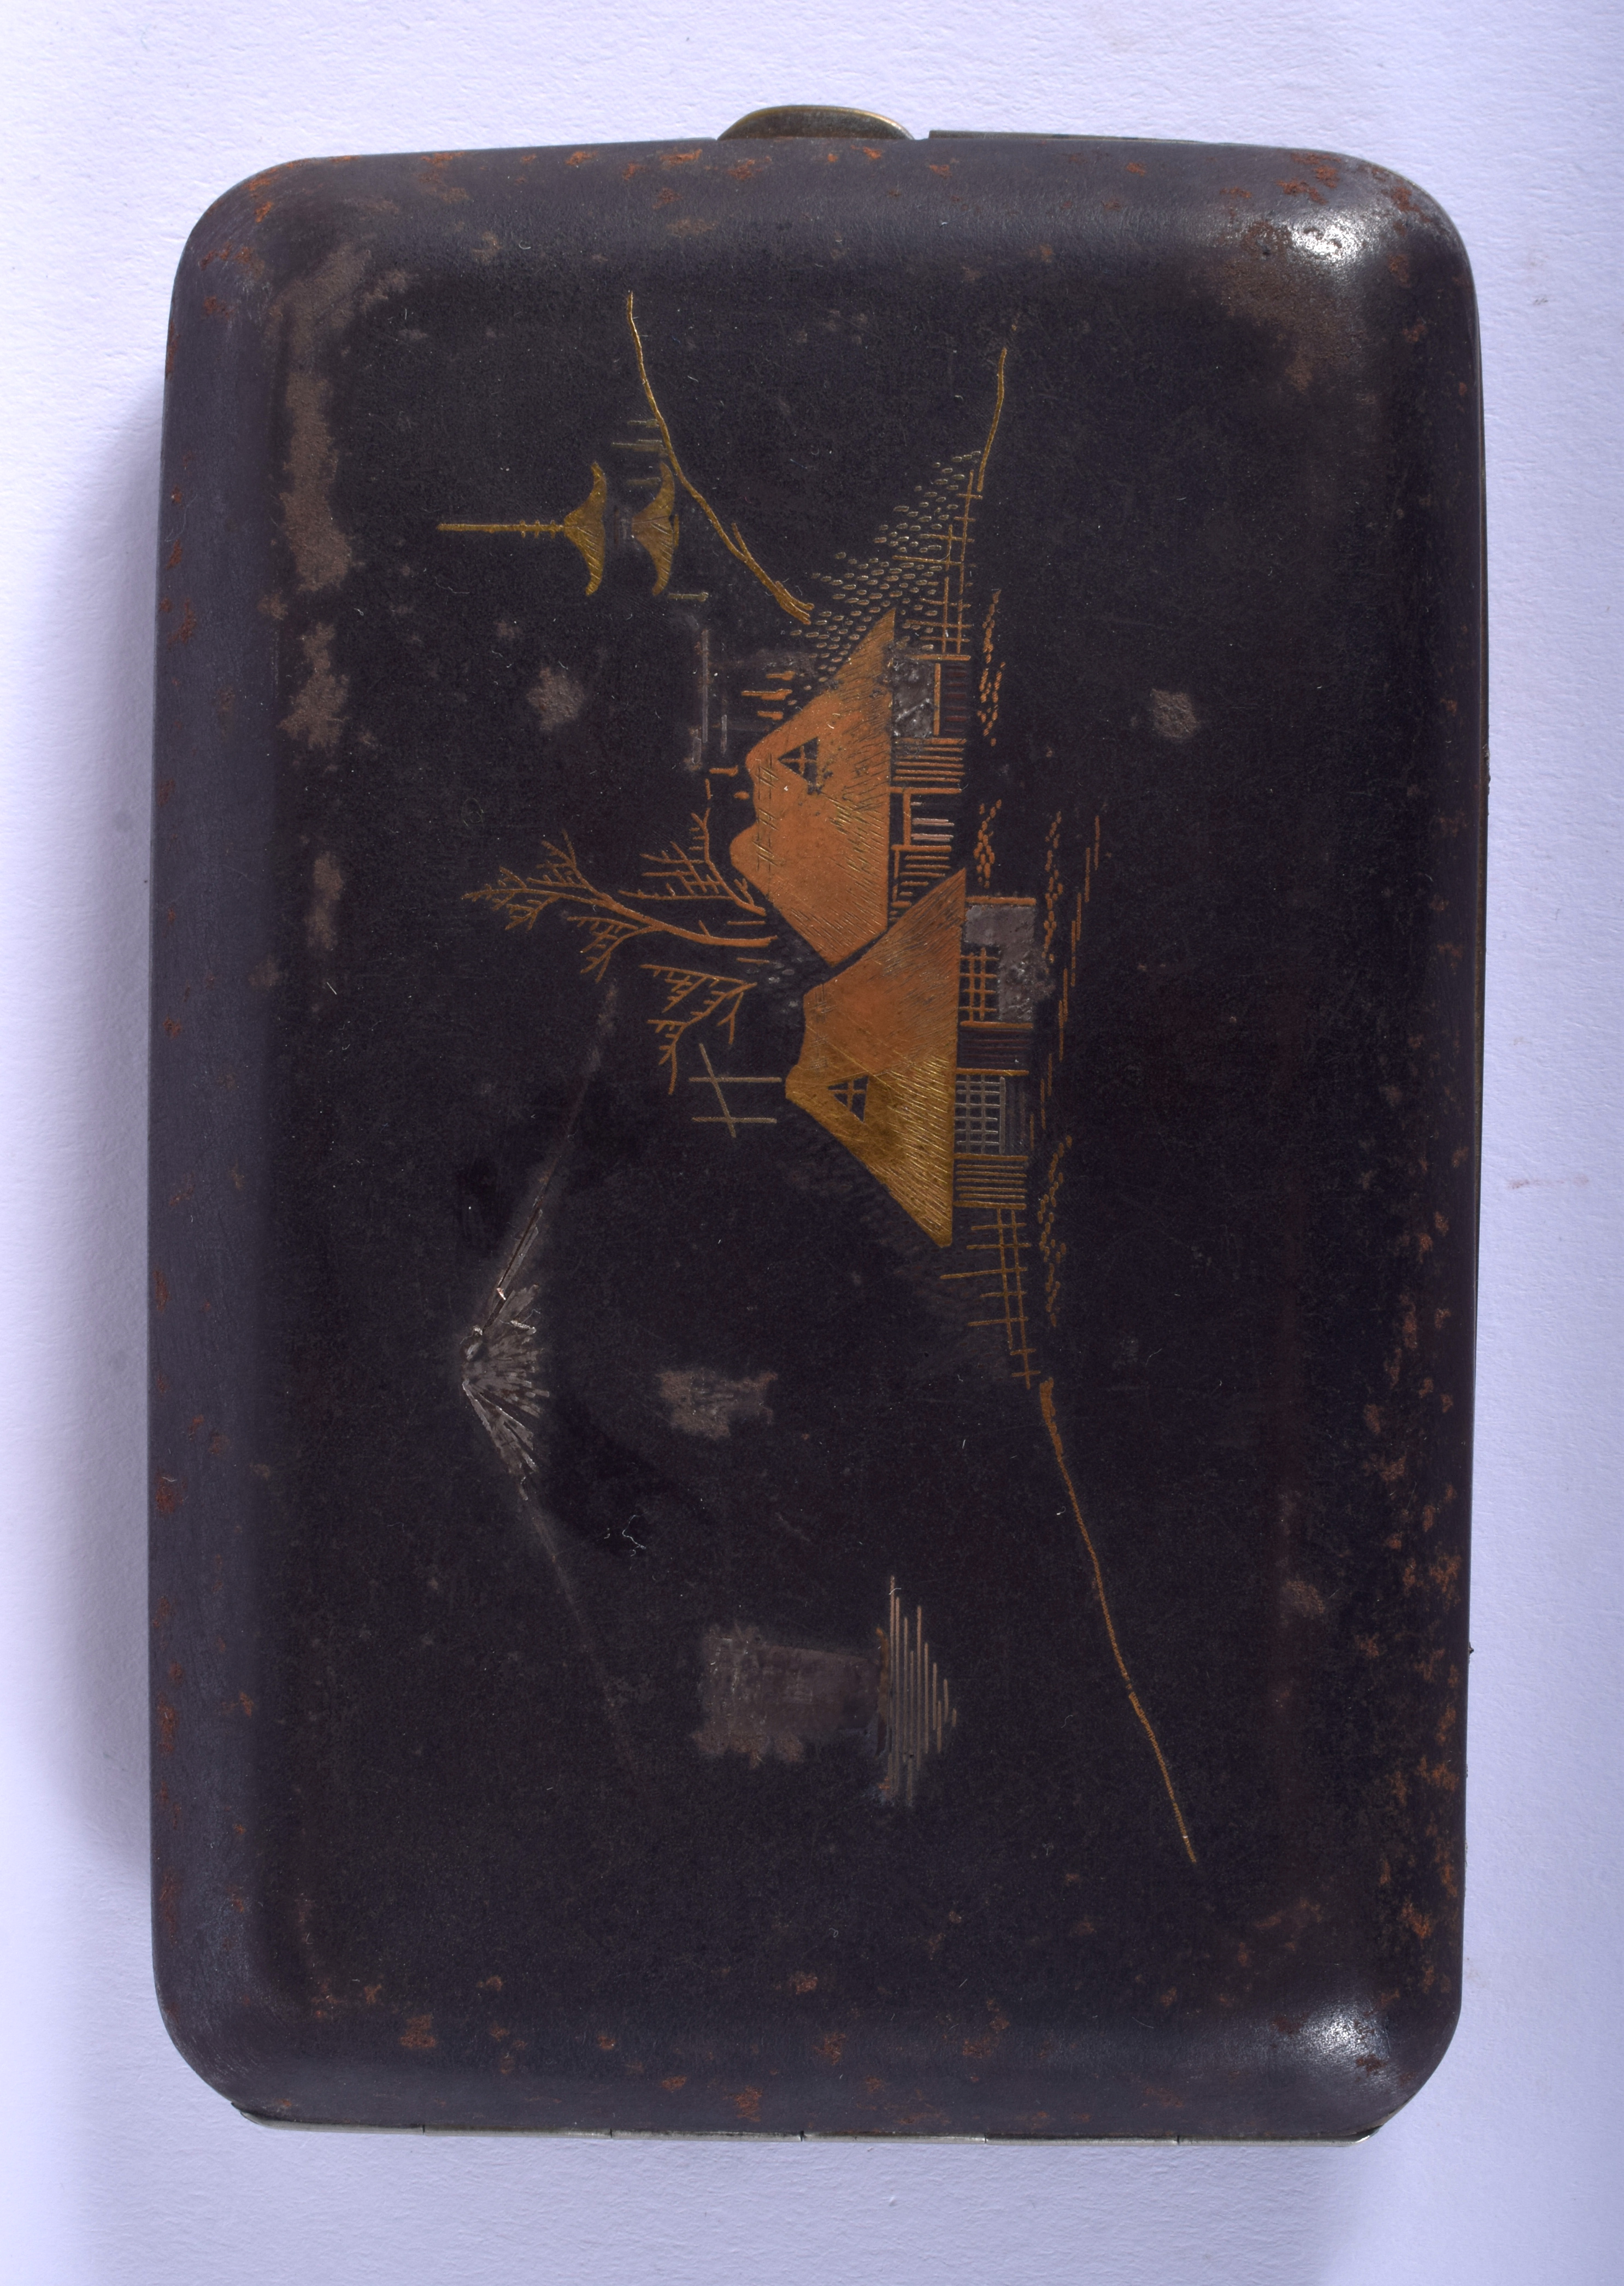 AN EARLY 20TH CENTURY JAPANESE TAISHO PERIOD KOMAI STYLE CIGARETTE CASE decorated with landscapes. 1